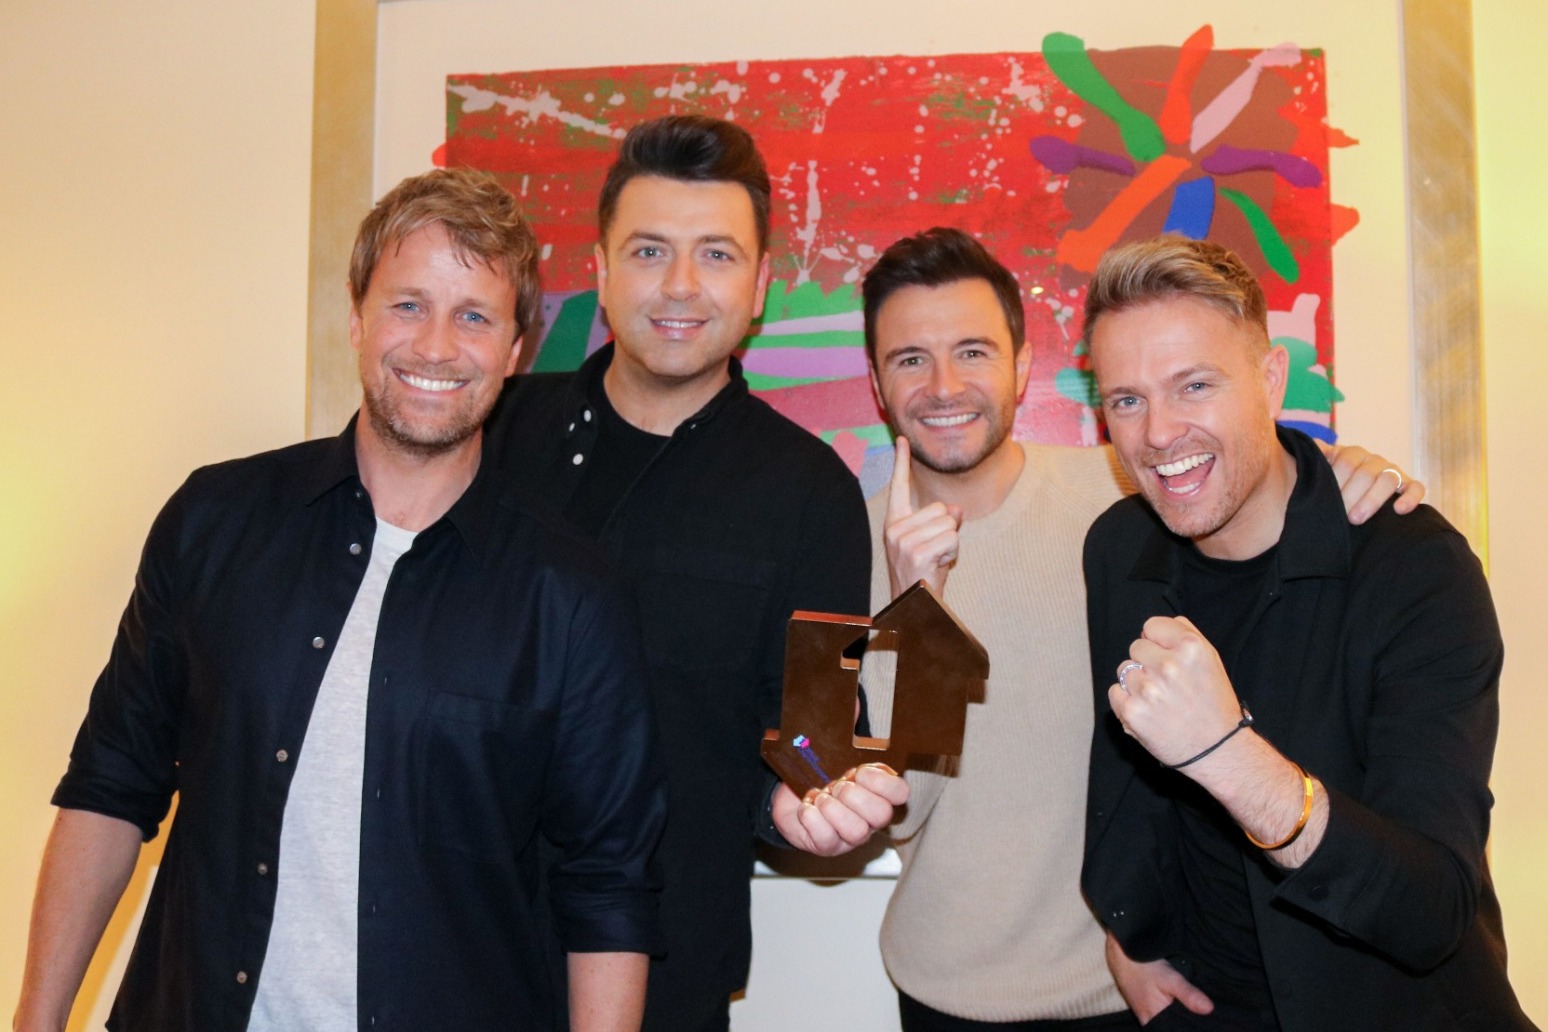 WESTLIFE SCORE FIRST NUMBER ONE ALBUM IN MORE THAN A DECADE 